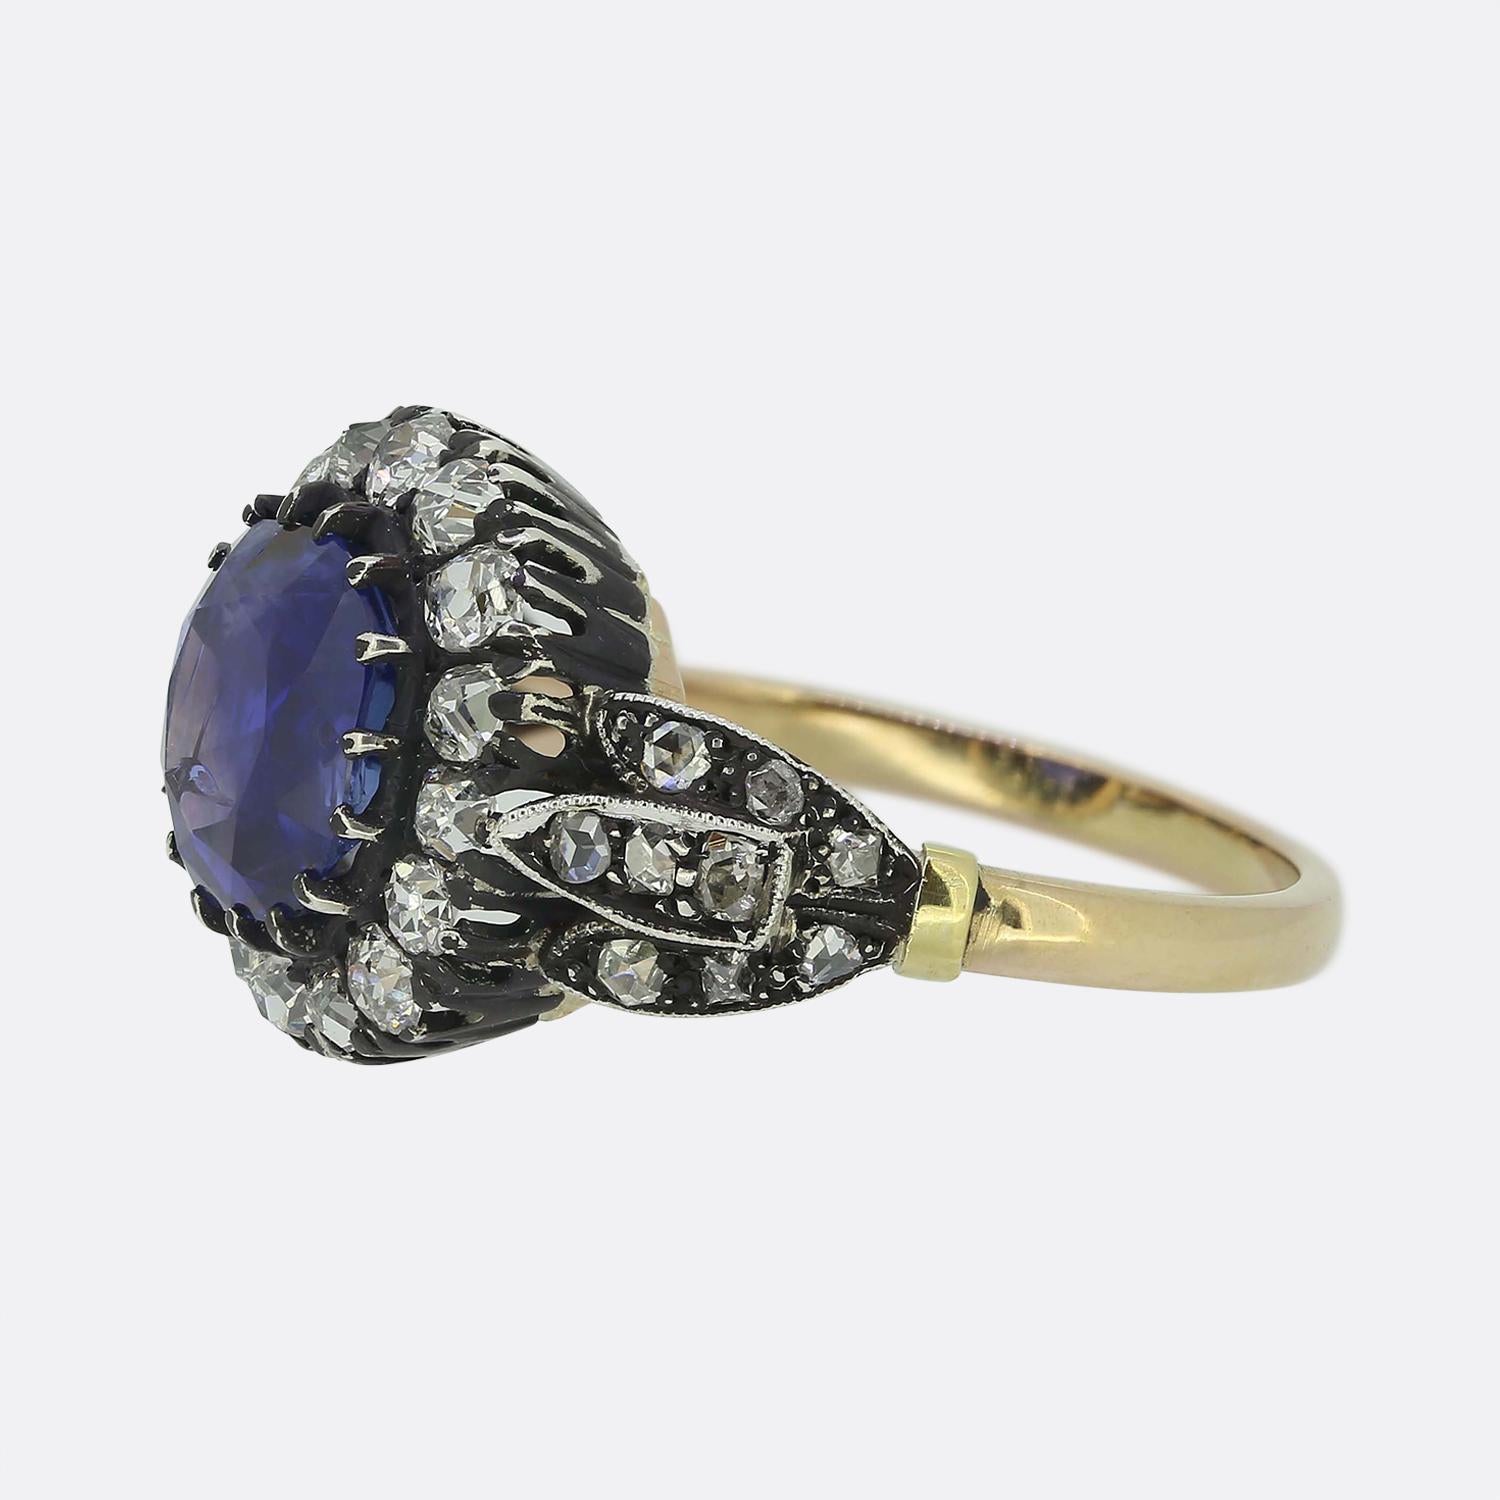 Here we have a simply beautiful sapphire and diamond cluster ring. This vintage piece has been expertly crafted in an early Victorian style and showcases a mesmerising round faceted sapphire of Burmese origin. This principal stone boasts a rich navy